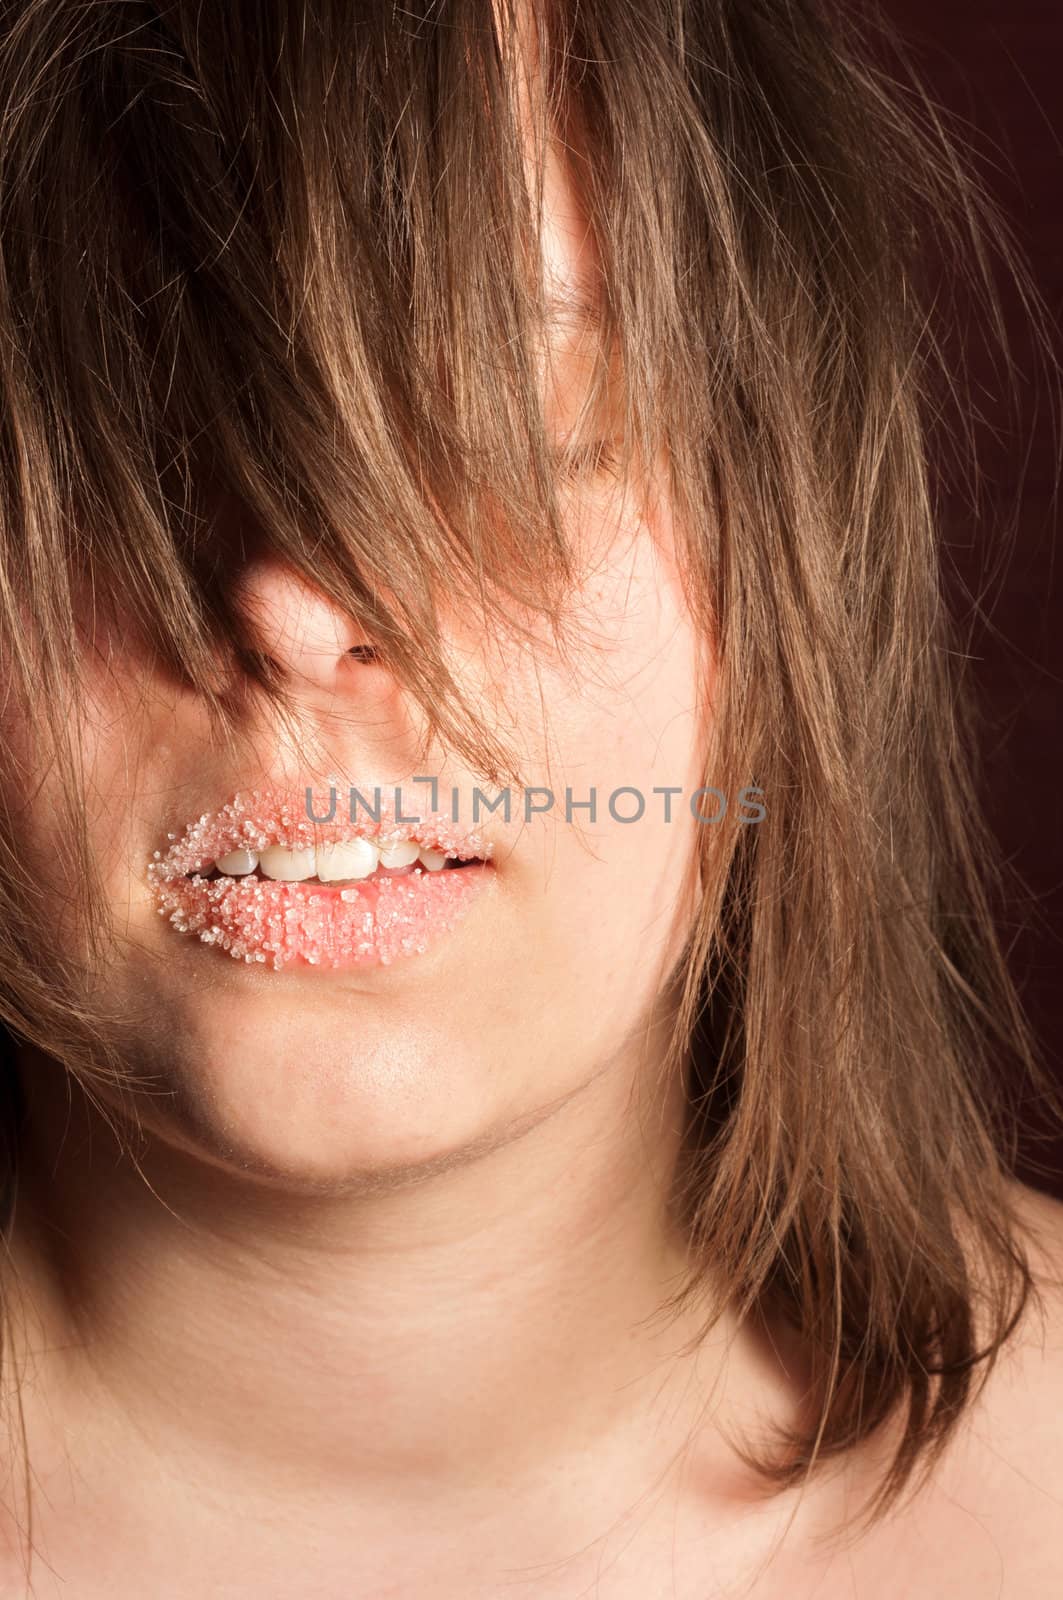 Girl with sugar on her lips